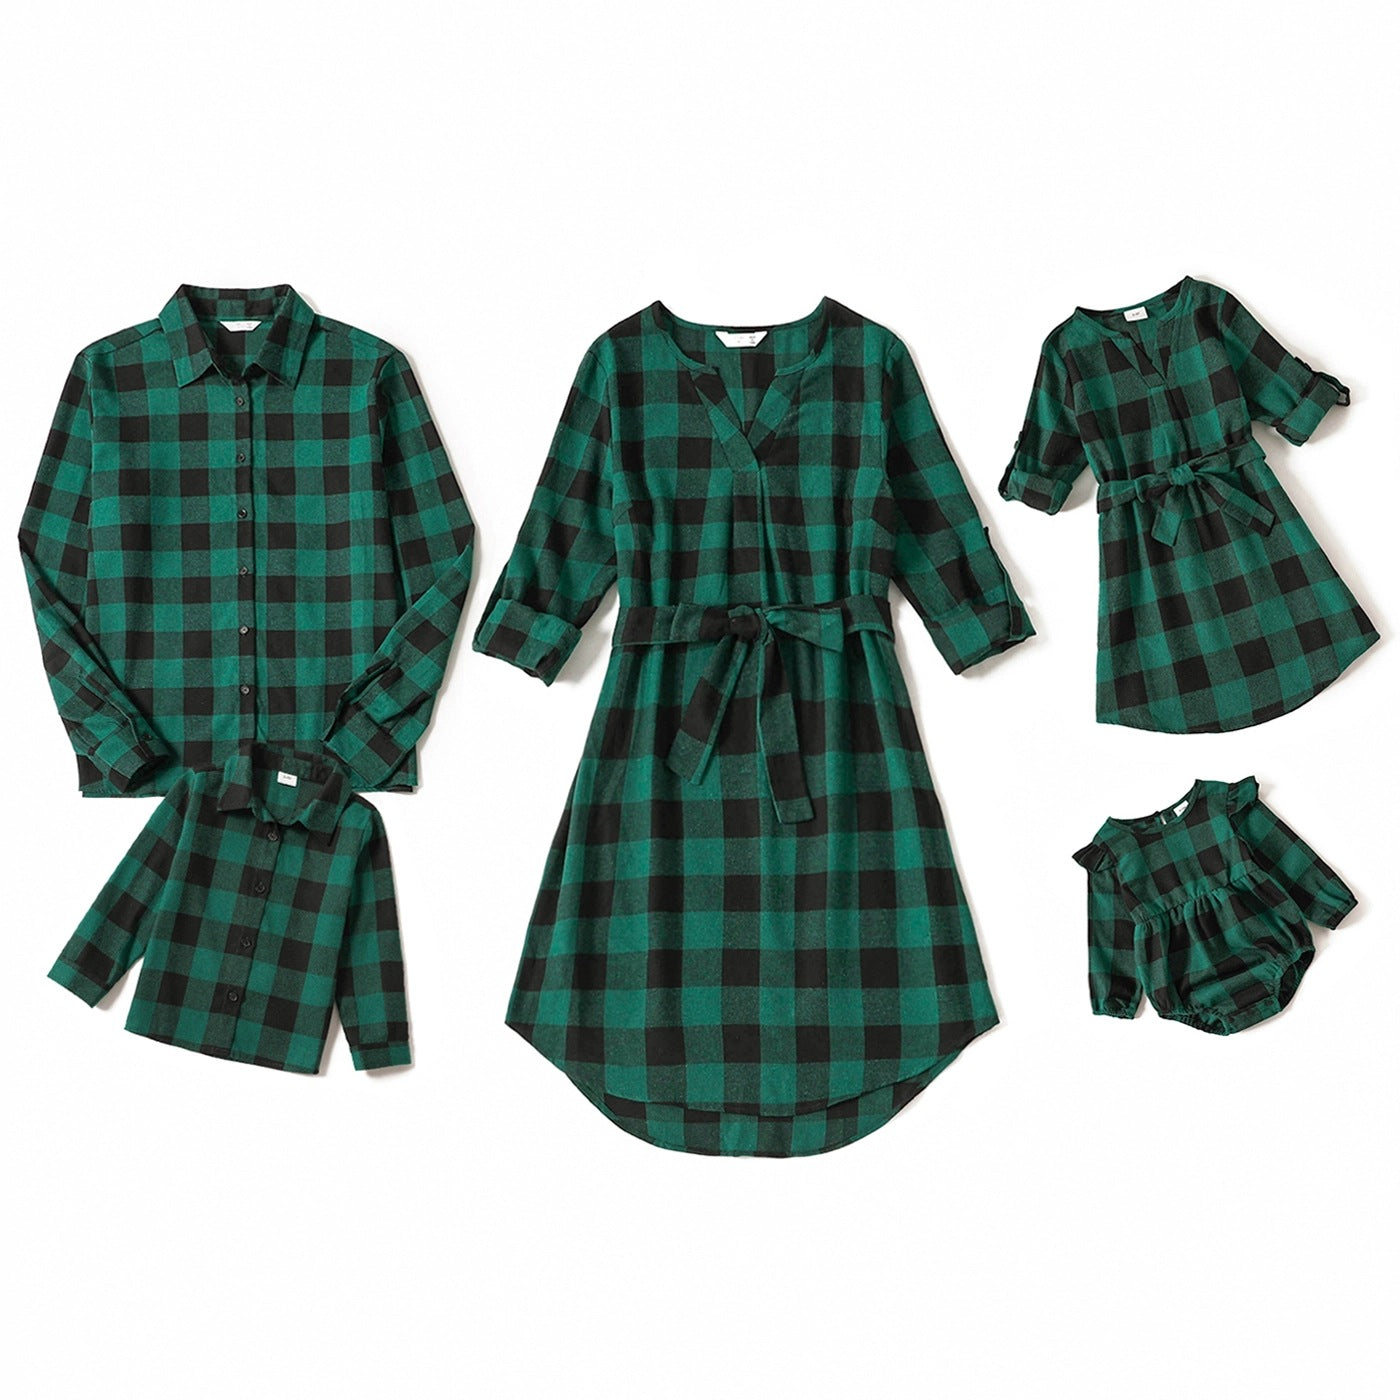 Family Matching Plaid Print Green Long-sleeve Family Dresses and Shirts Sets